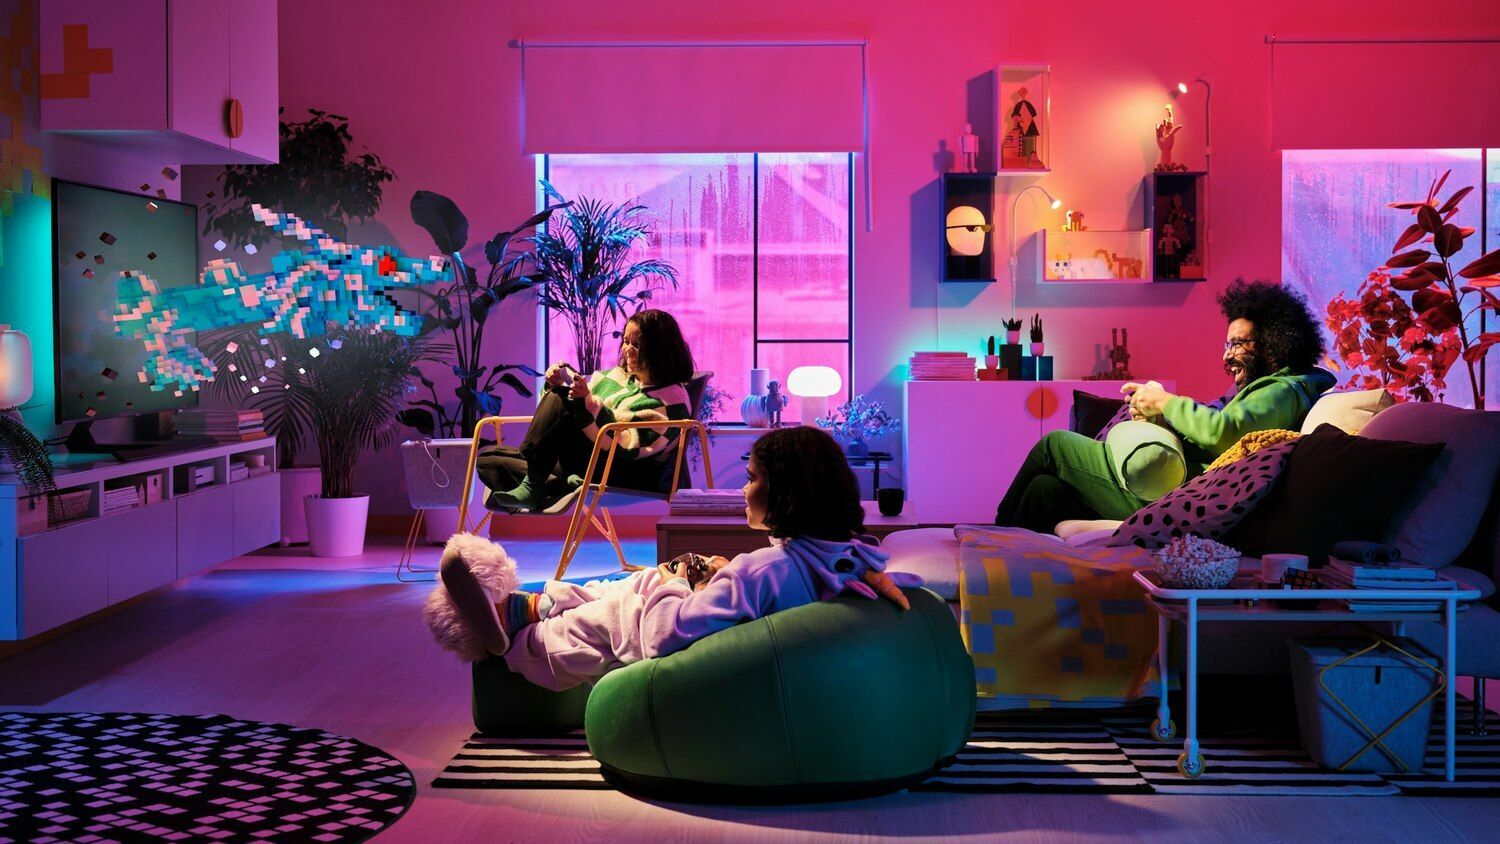 Three people sit in a living room lit with pink, purple, and blue tones. A blue pixelated dragon pops out of the TV they are all looking at.